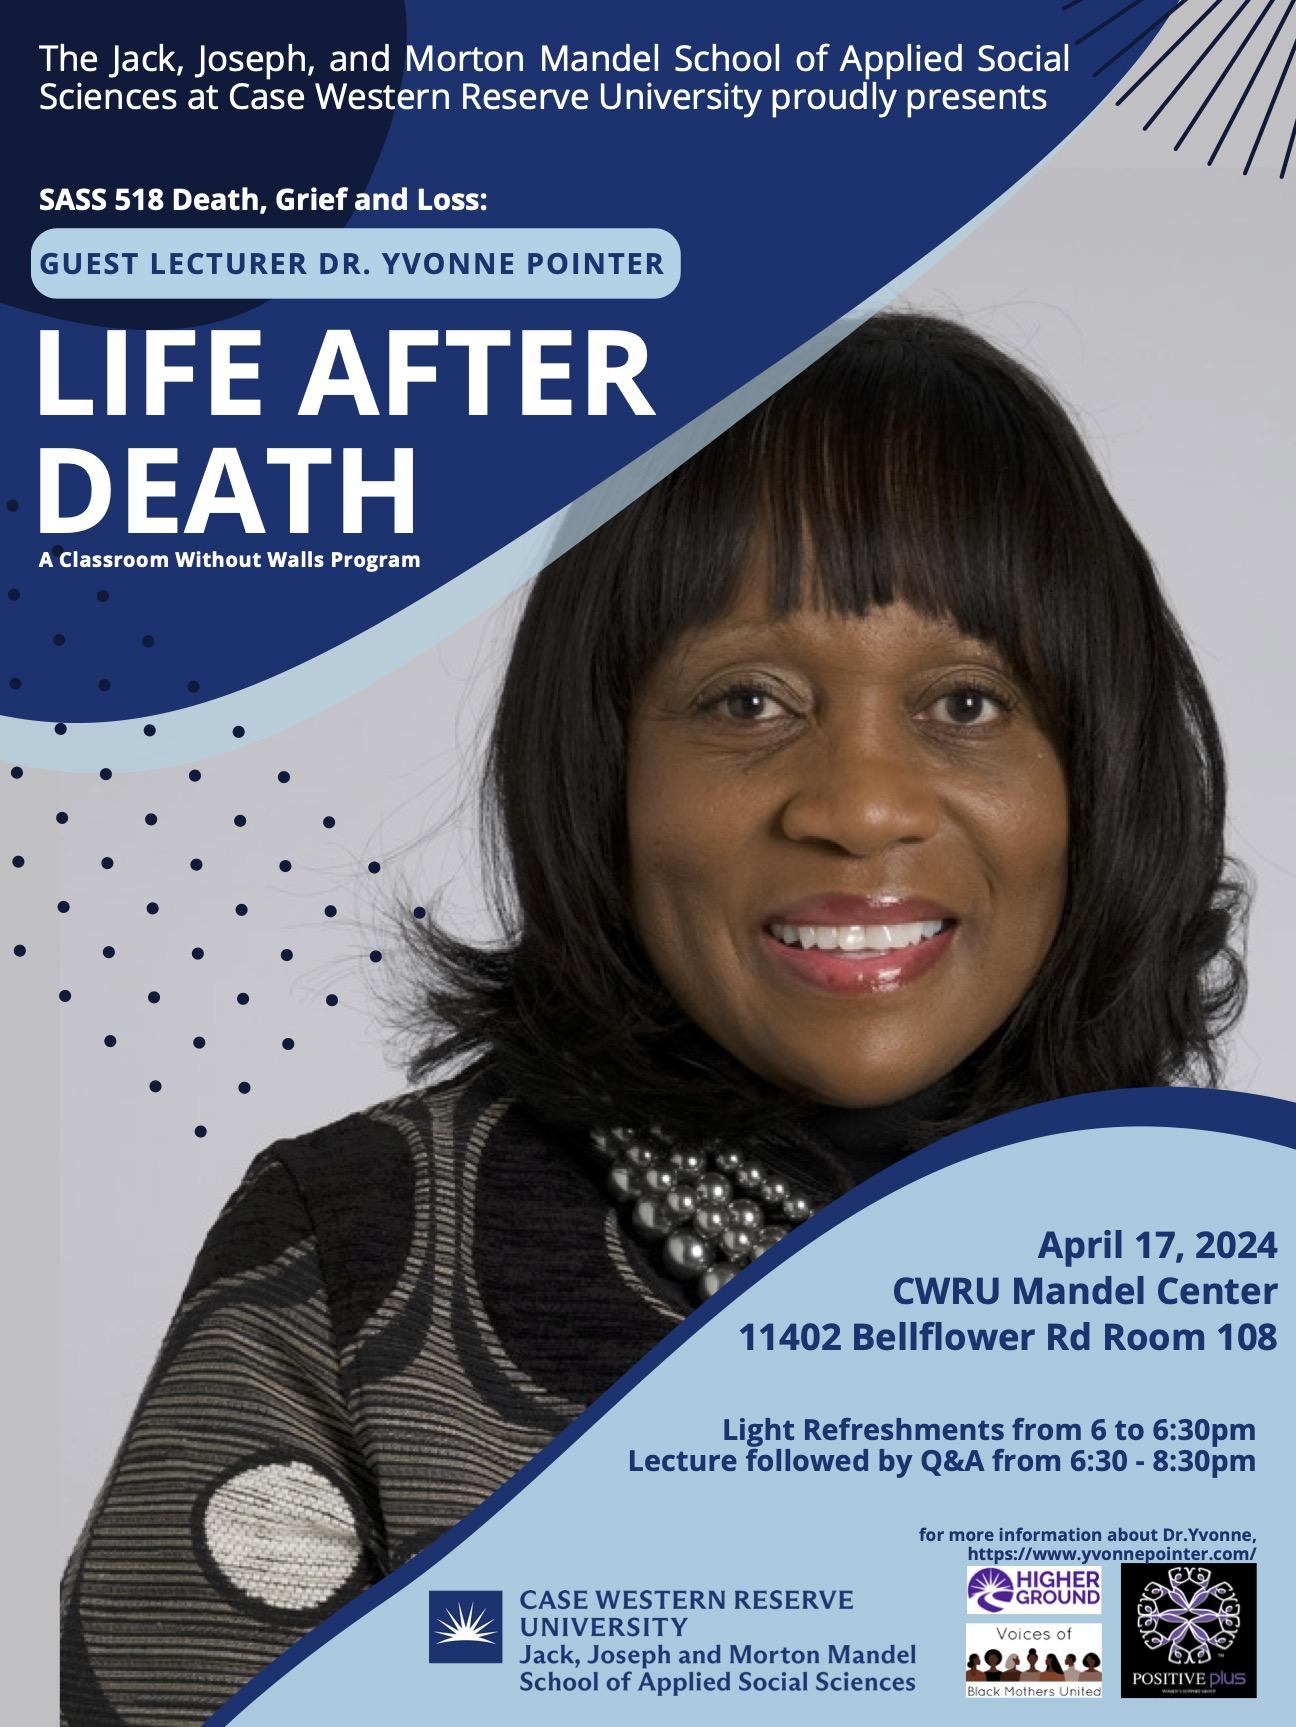 Life After Death event flyer with image of Yvonne Pointer